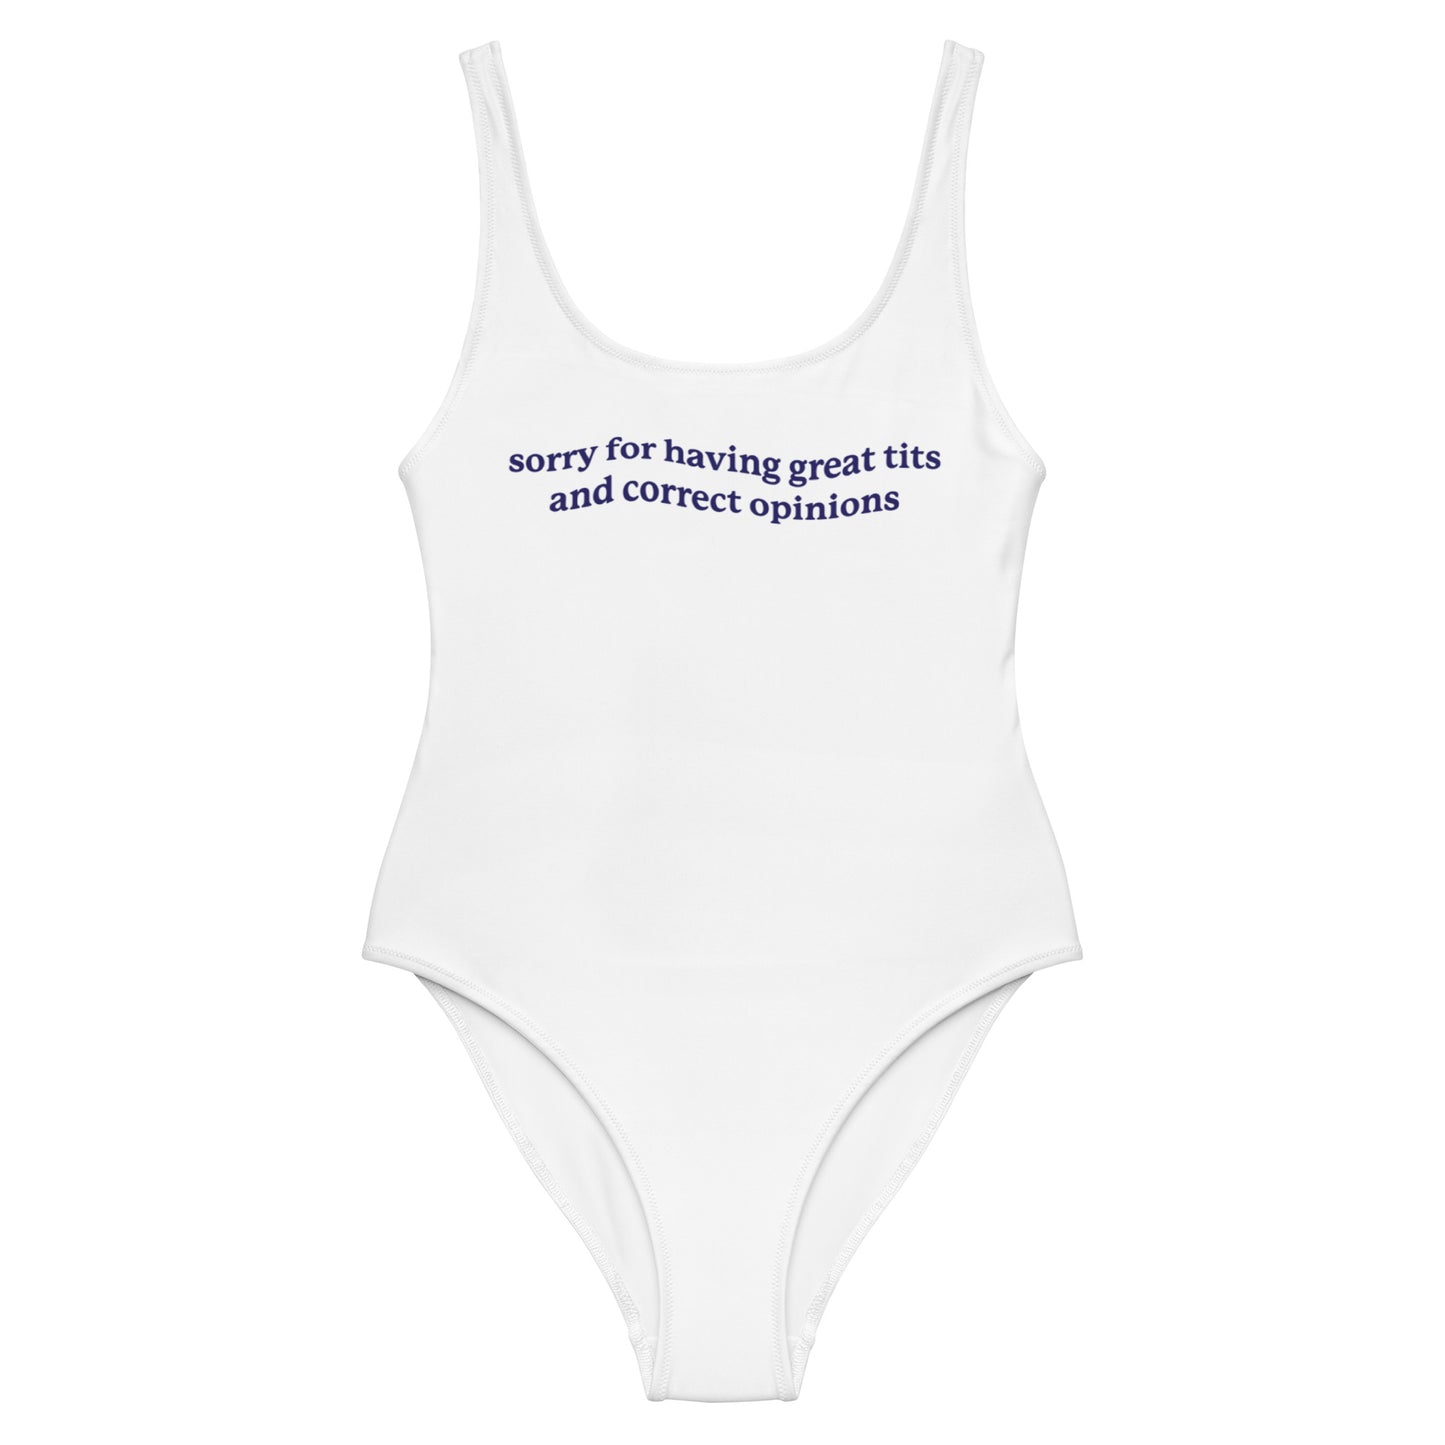 Great Tits & Correct Opinions One-Piece Swimsuit (White)